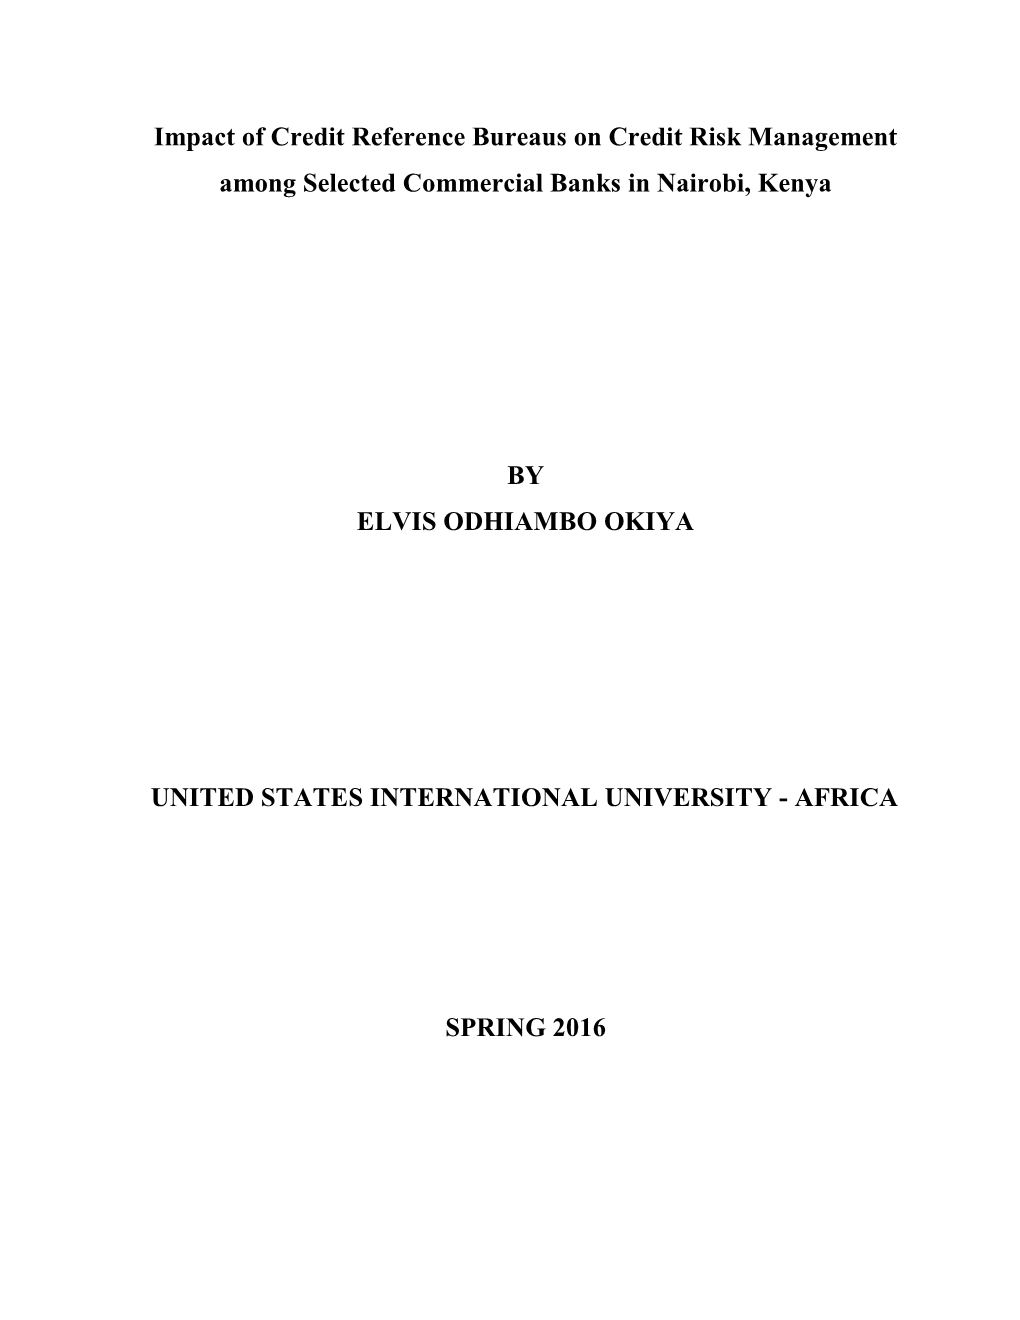 Impact of Credit Reference Bureaus on Credit Risk Management Among Selected Commercial Banks in Nairobi, Kenya by ELVIS ODHIAMBO